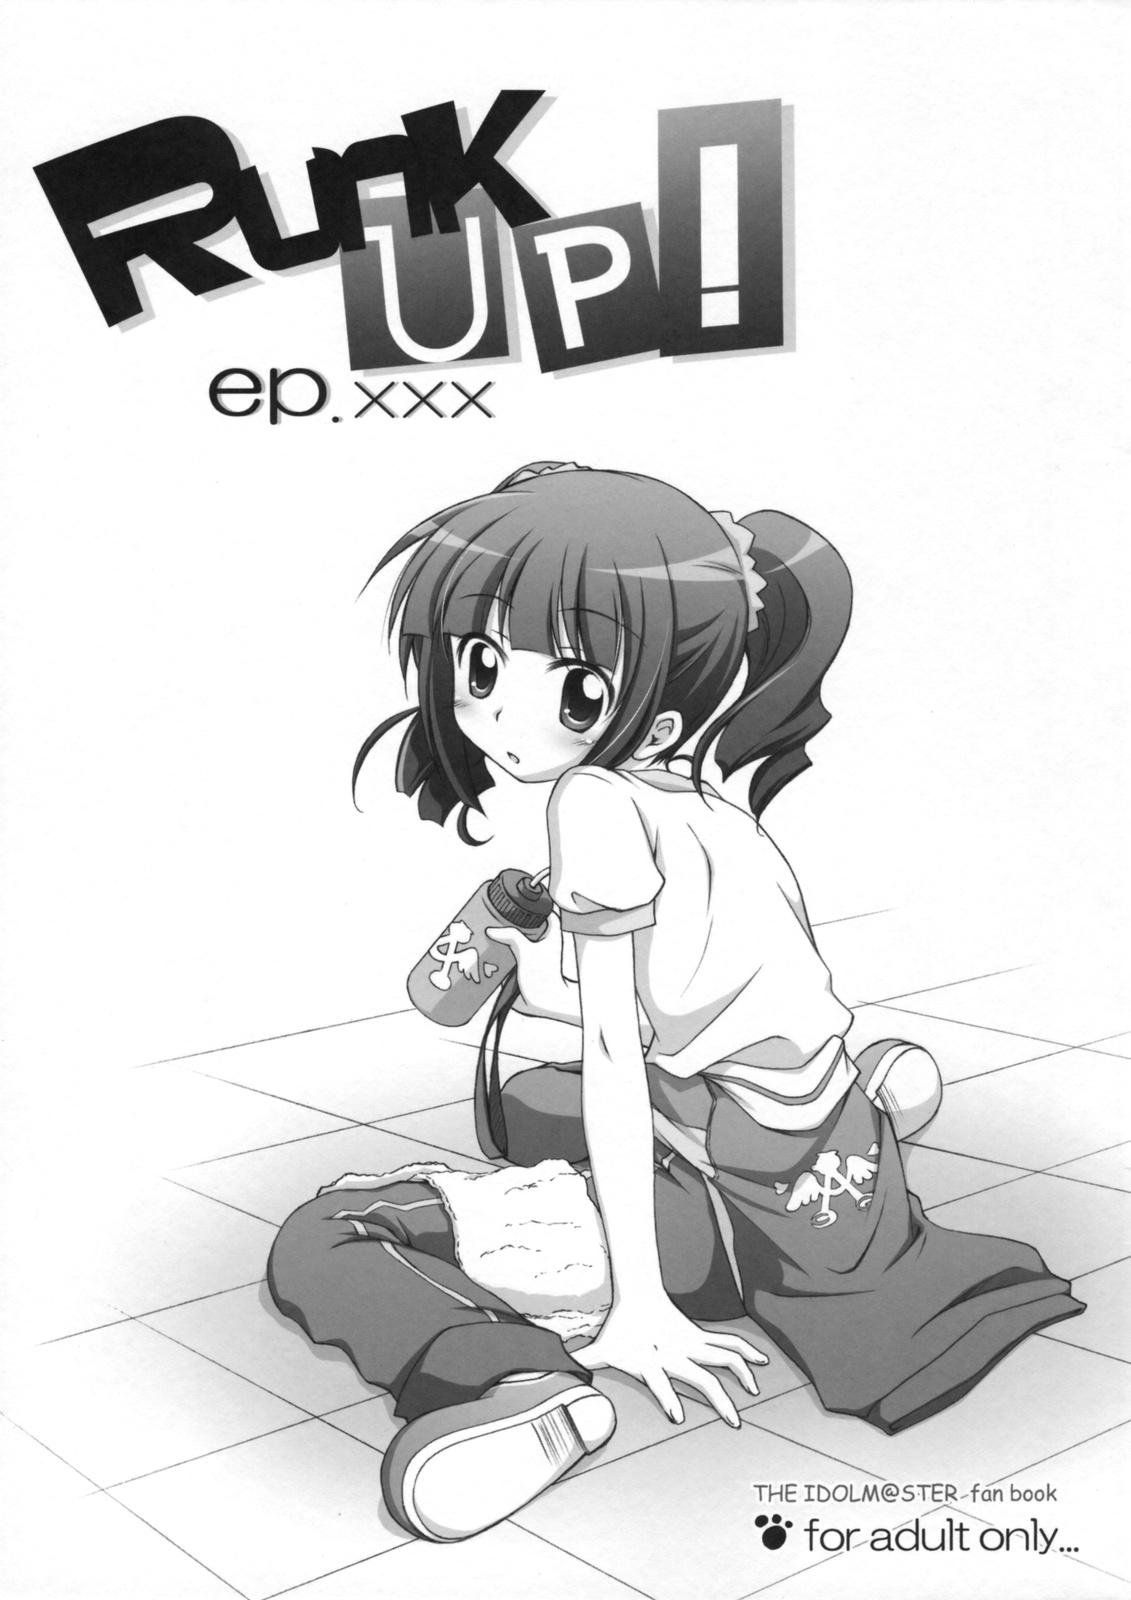 Pay Runk UP! ep.xxx - The idolmaster Hot Couple Sex - Page 1